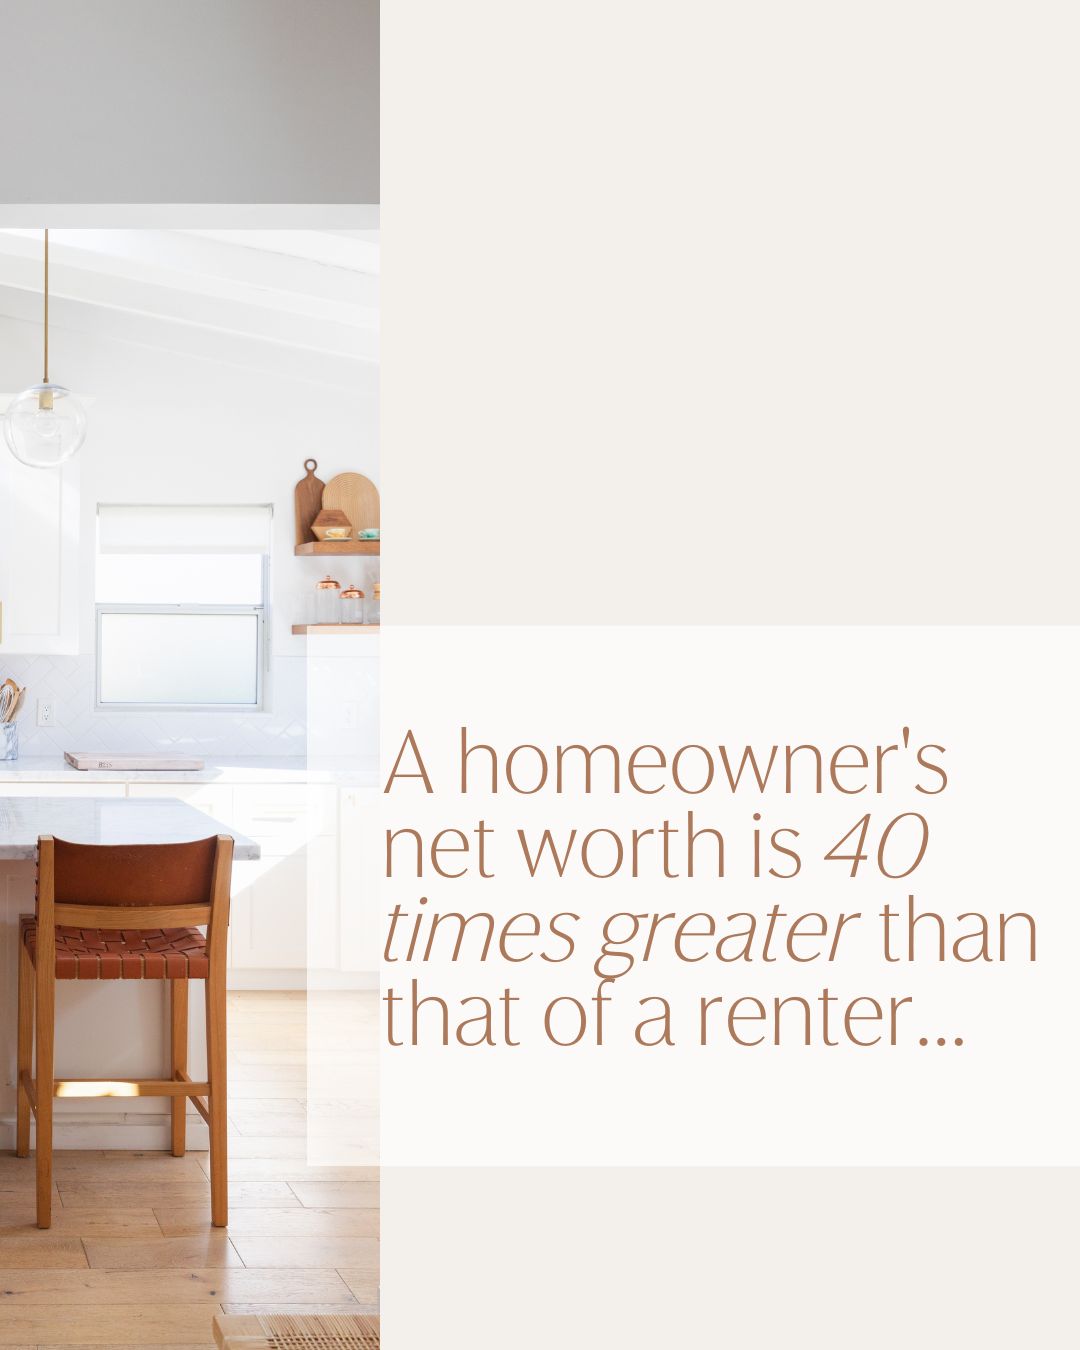 Laura Lyons | Realtor on LinkedIn: This stat rocked me… According to ...